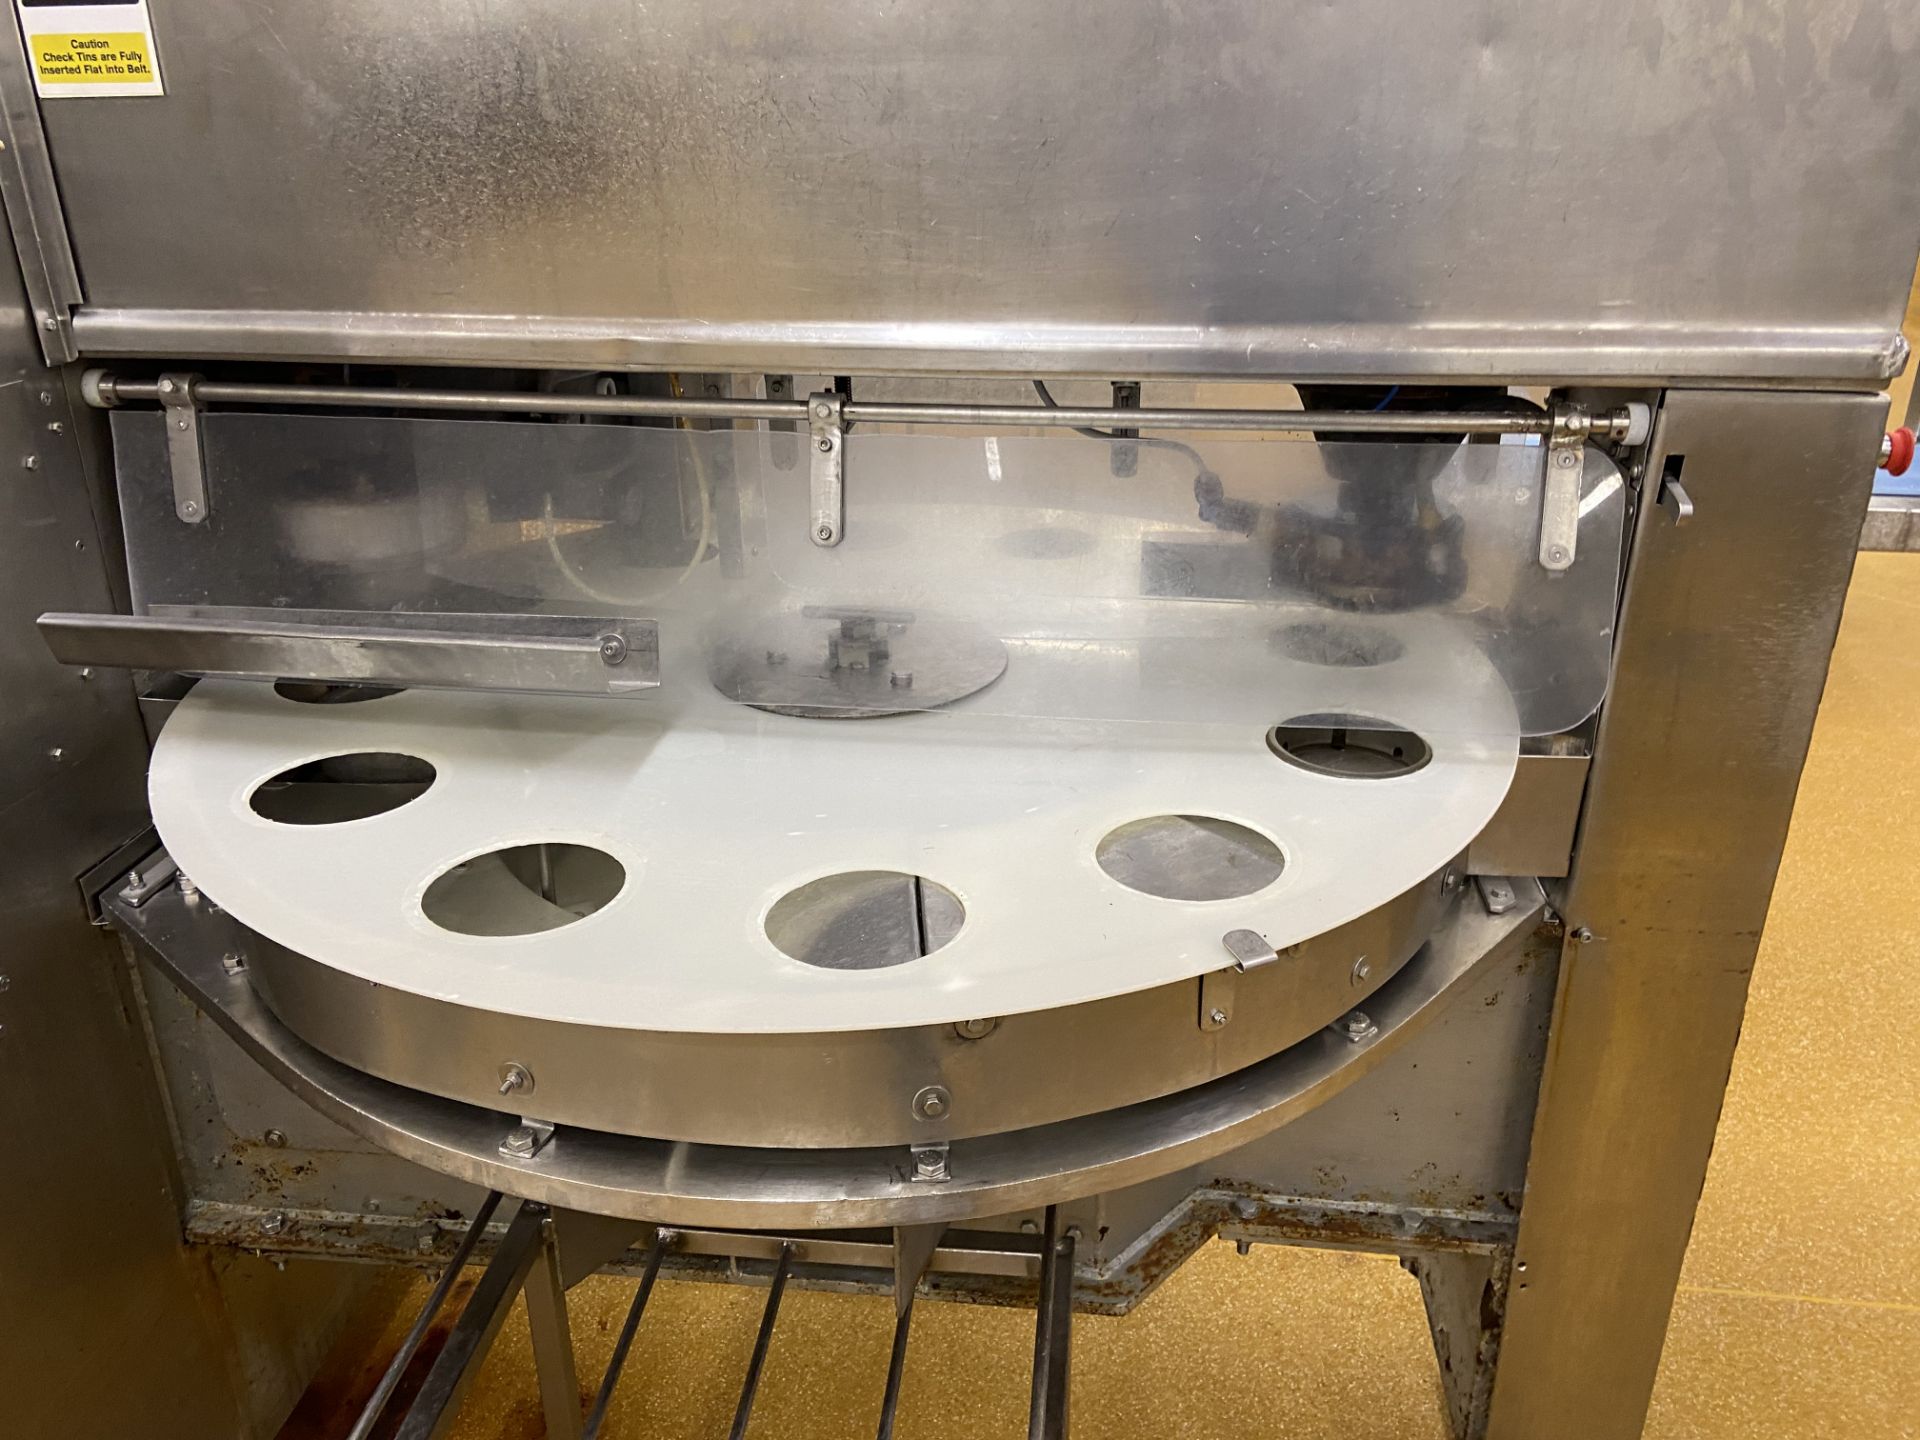 Big T ROTARY PIE FILLING & CRIMPING MACHINE (T5), with Orbiter pastry sheeter (S3), with stainless - Image 4 of 9